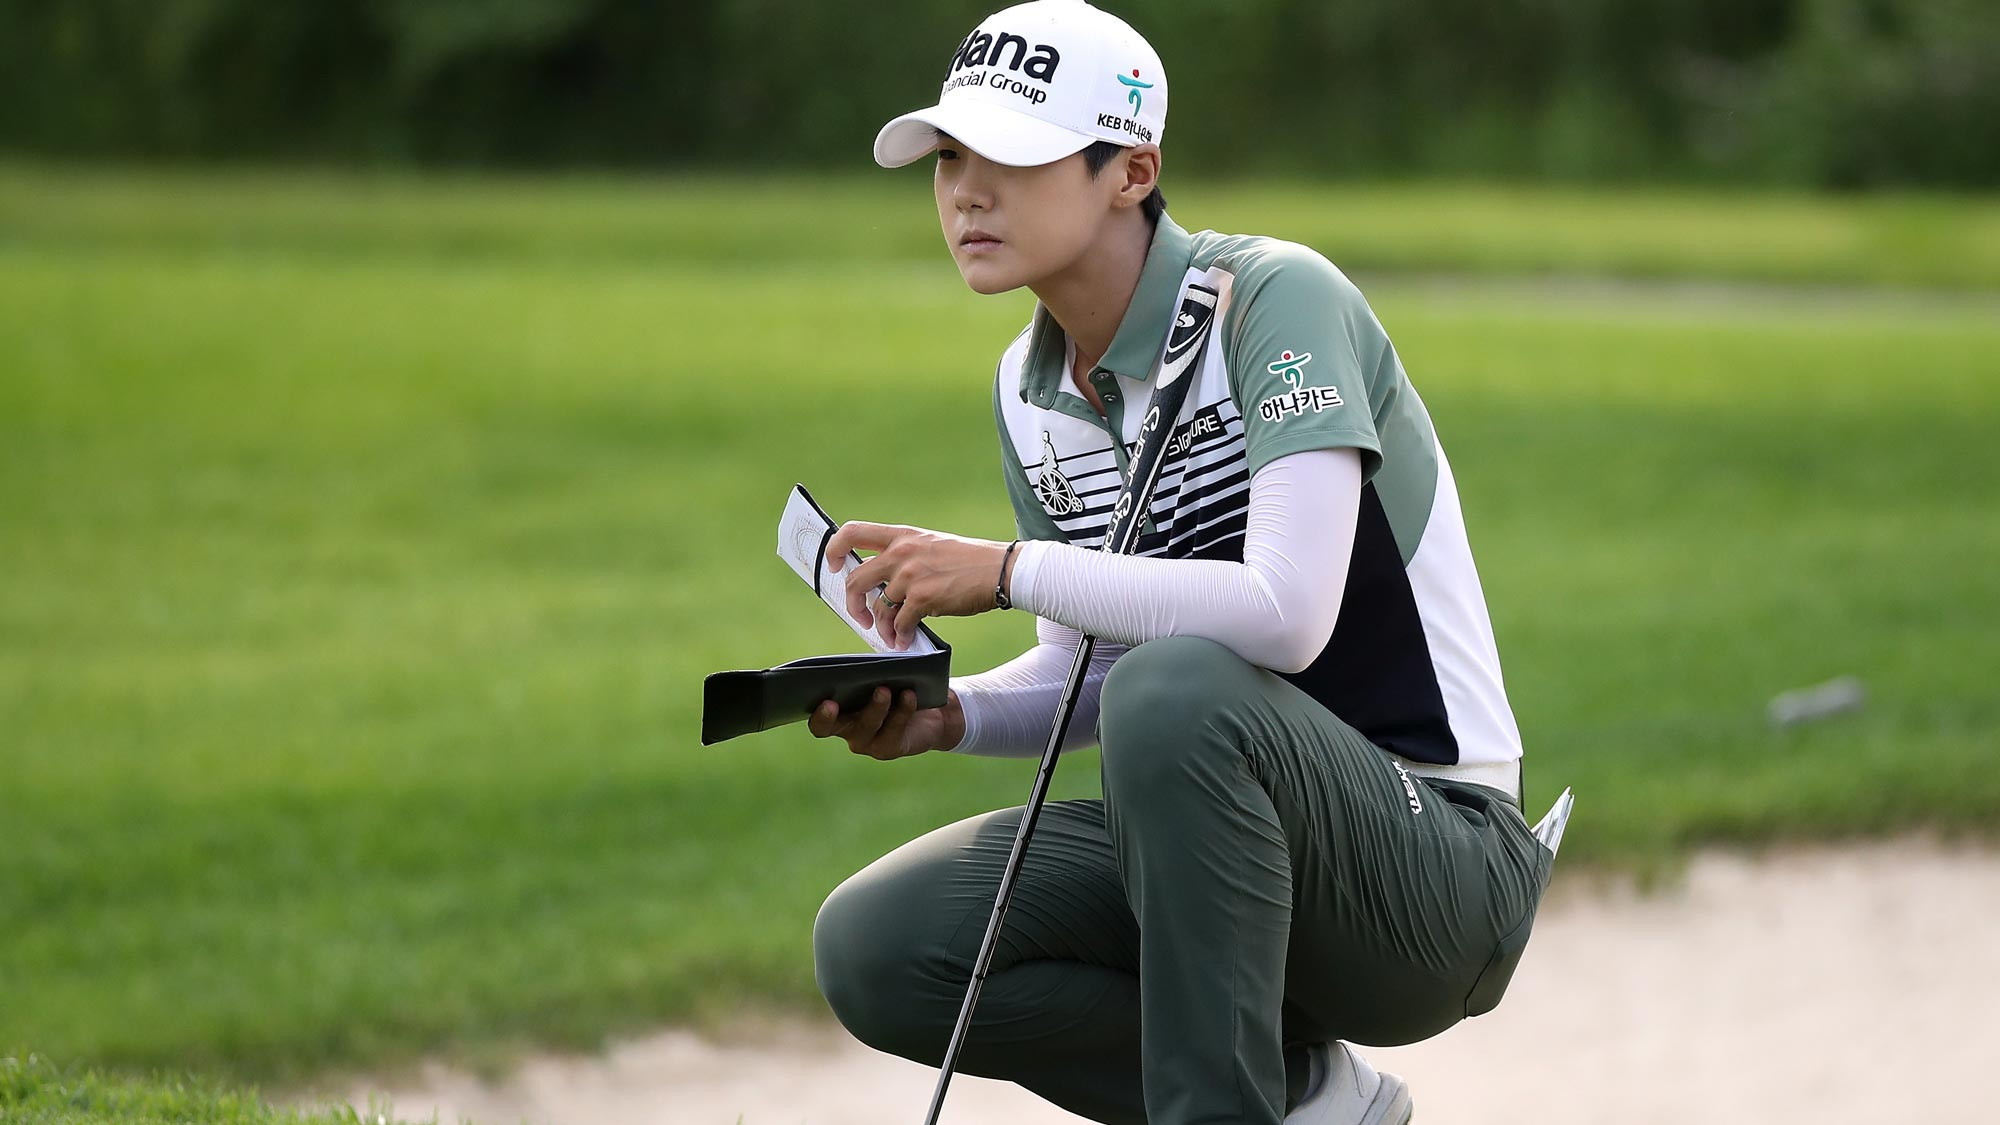 Park Sung-hyun to return to LPGA Tour at competitive ANA Inspiration field